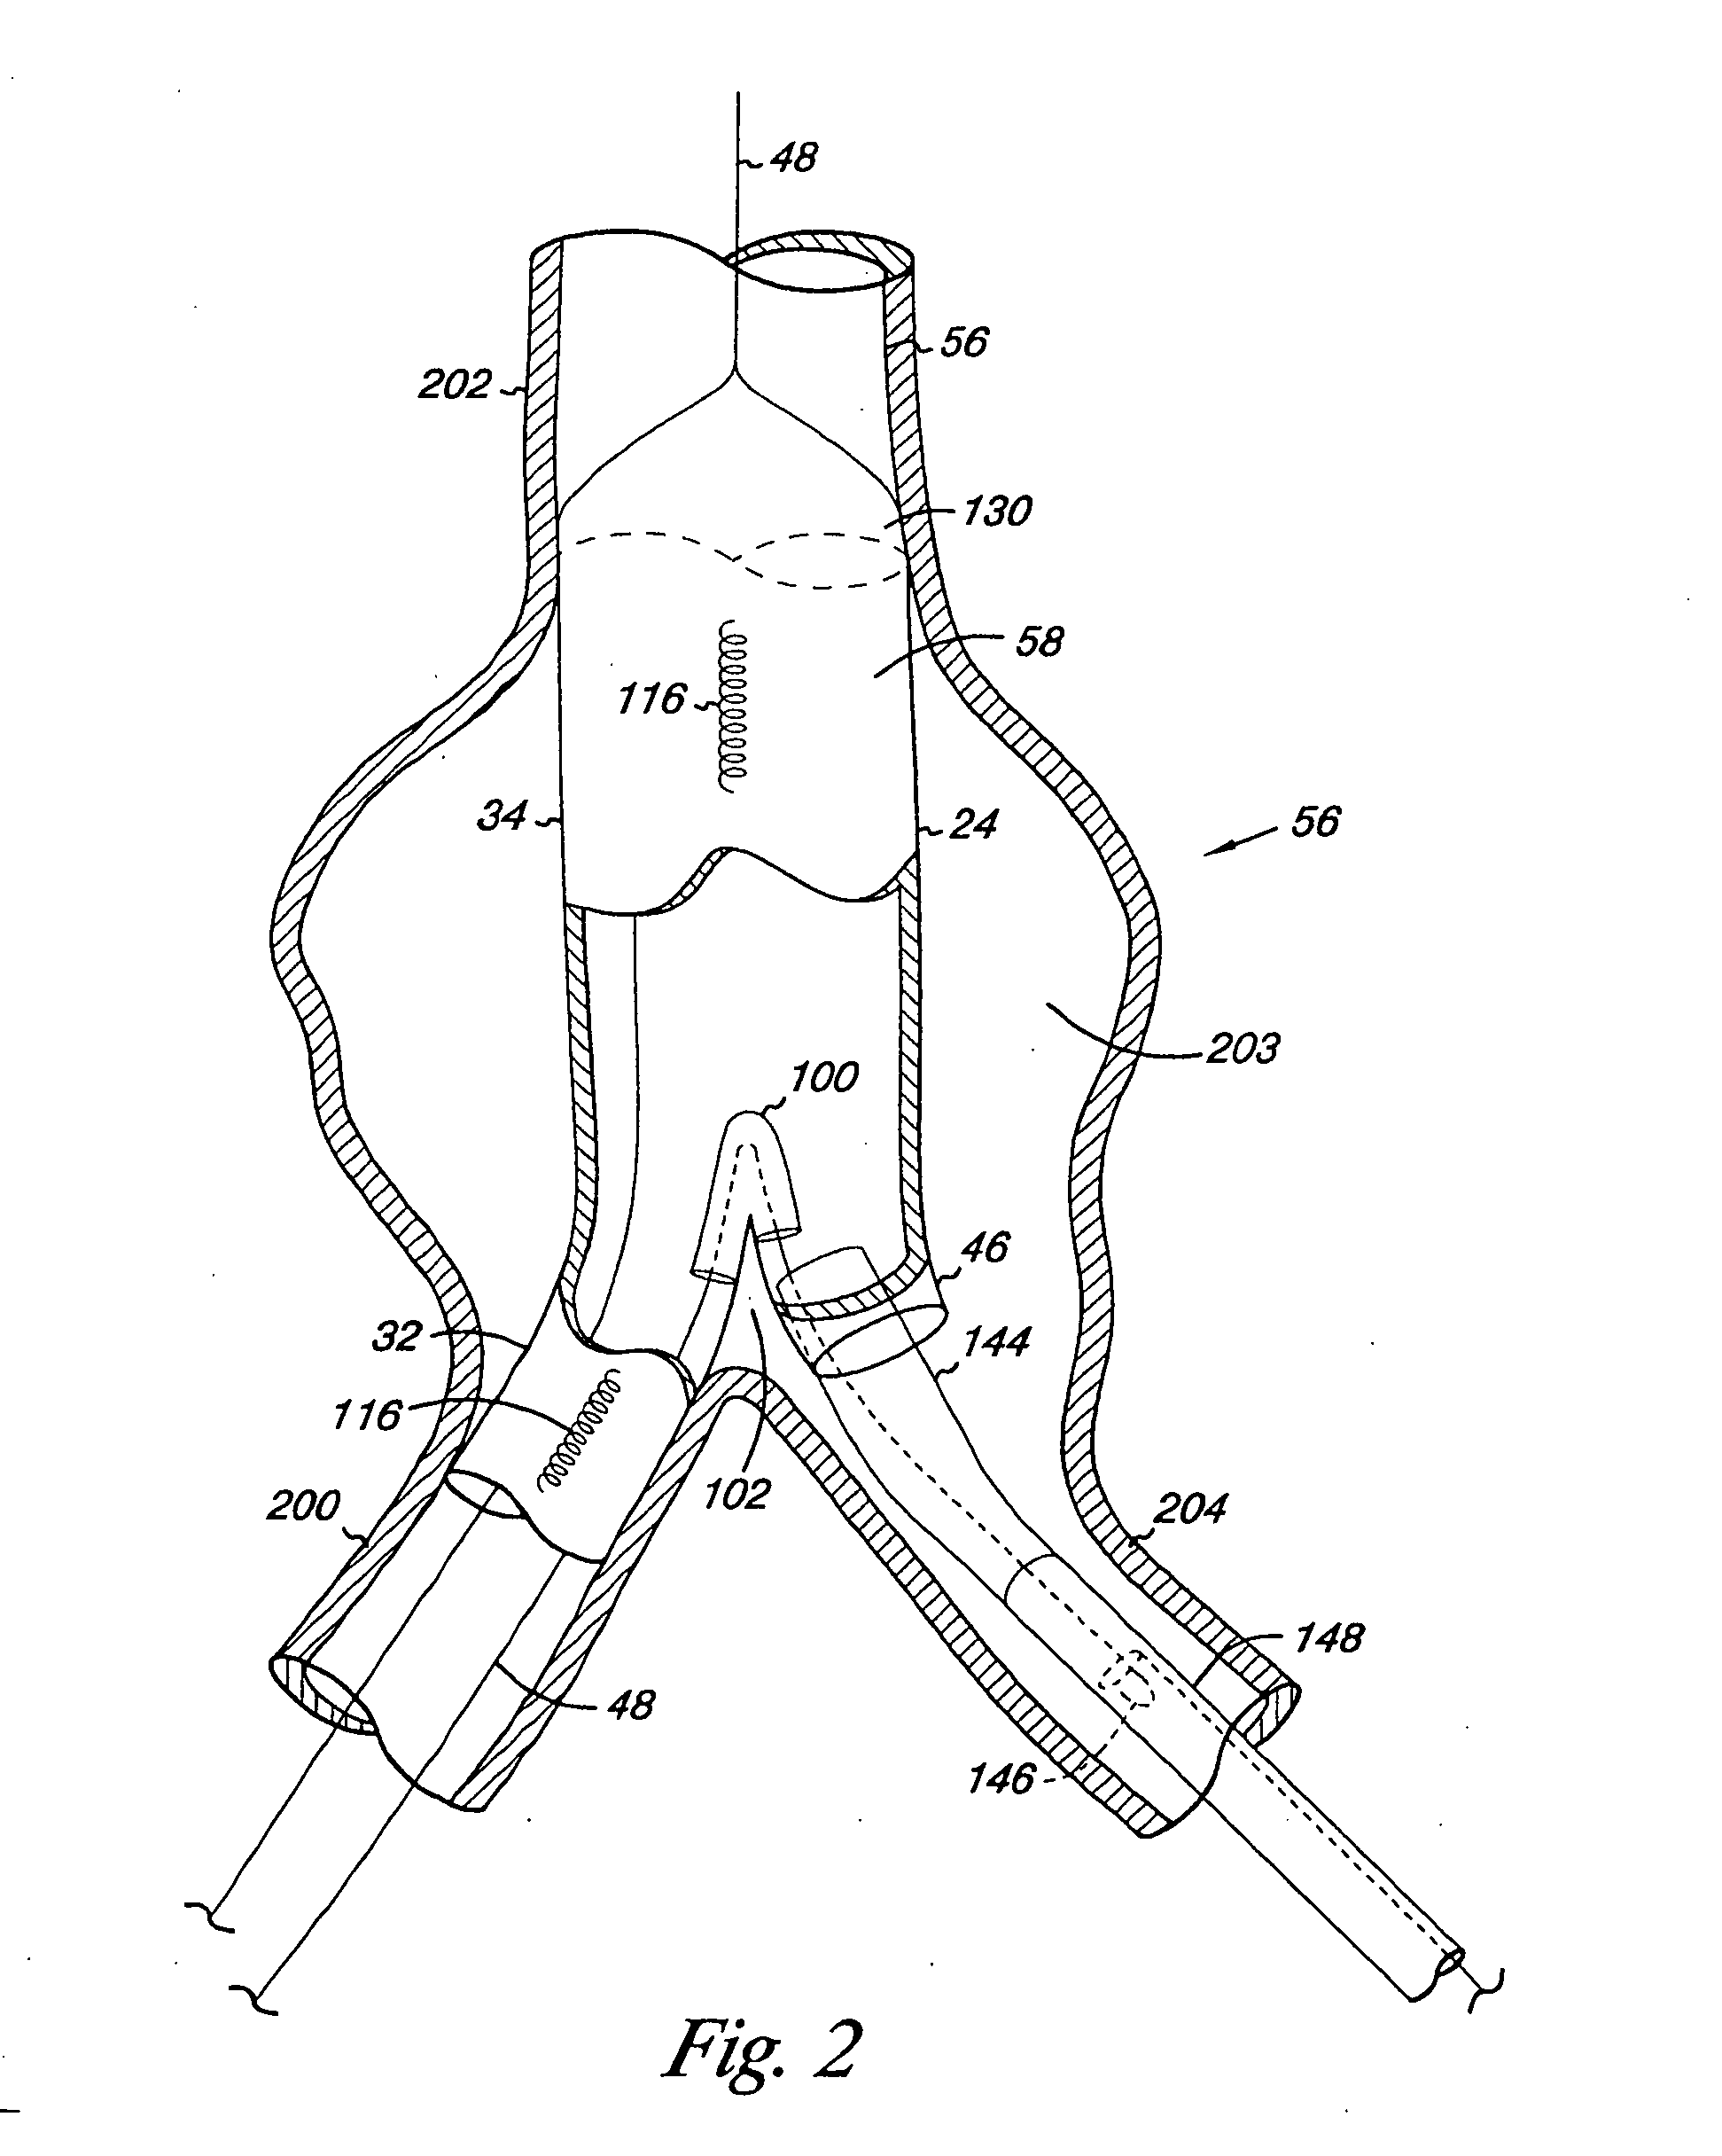 Endovascular graft including substructure for positioning and sealing within vasculature